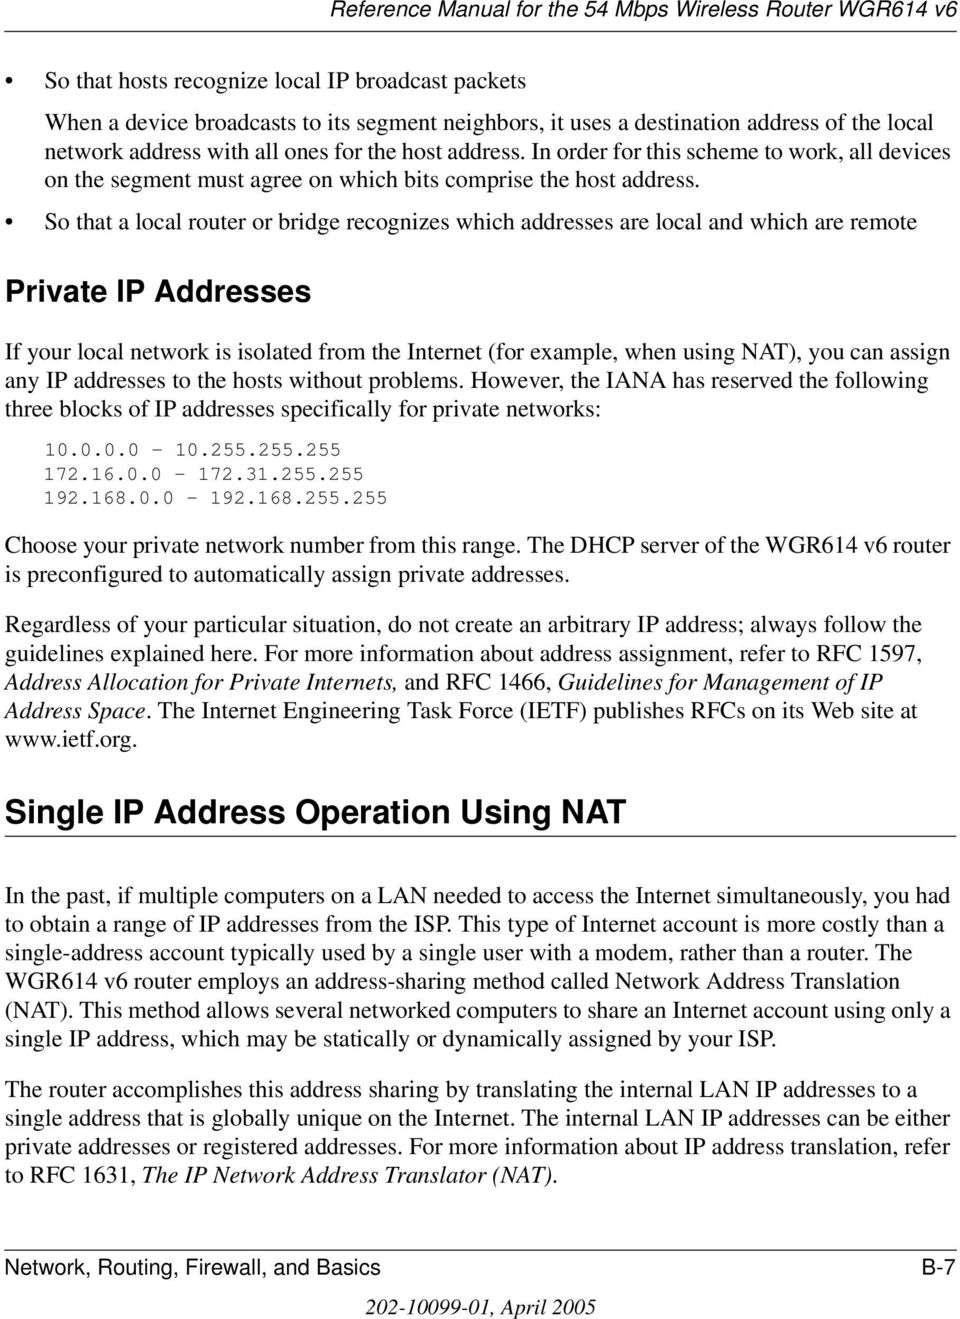 So that a local router or bridge recognizes which addresses are local and which are remote Private IP Addresses If your local network is isolated from the Internet (for example, when using NAT), you